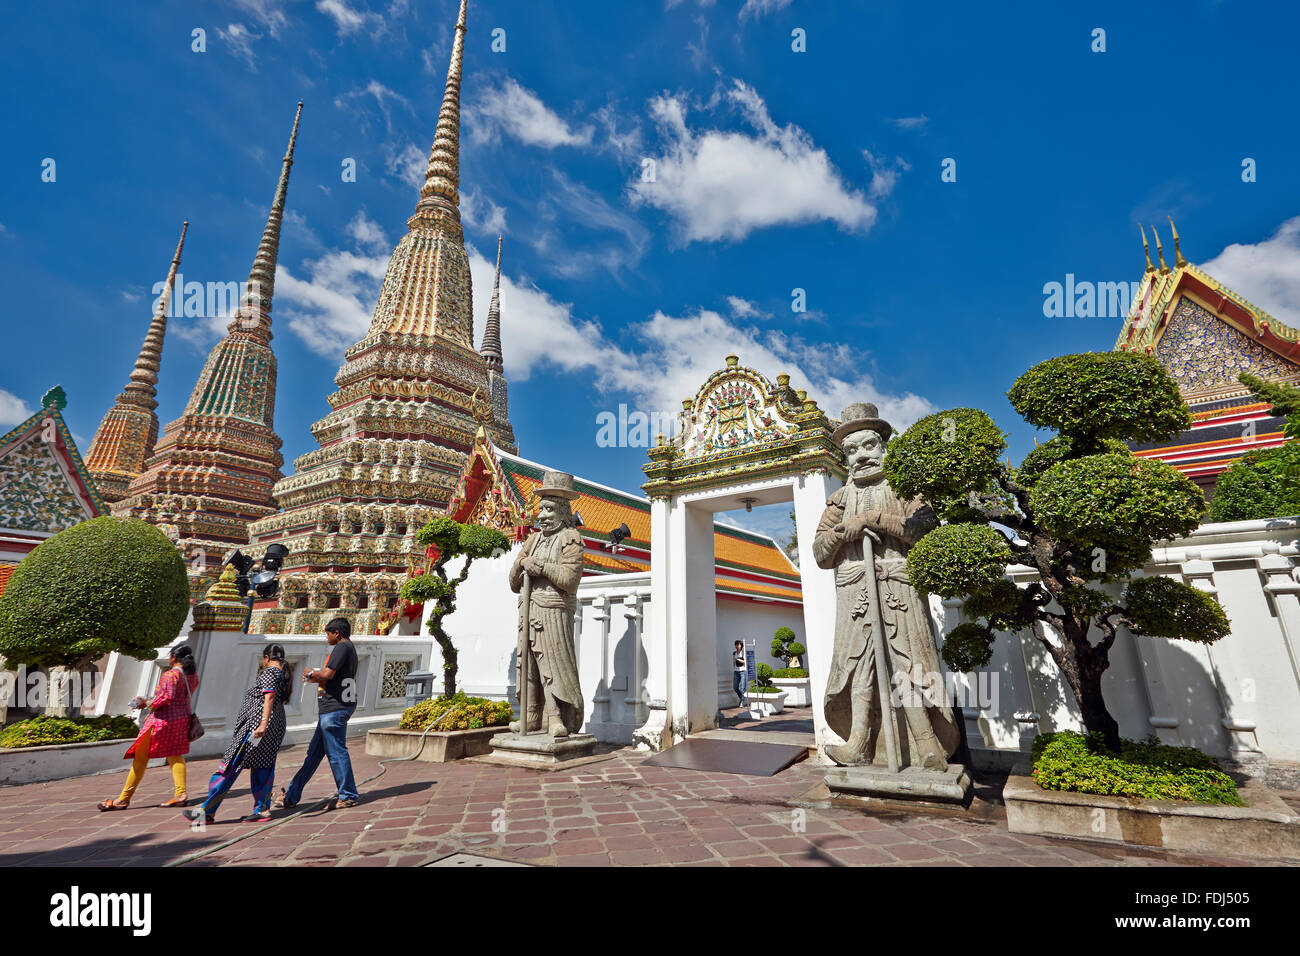 People walking by the Phra Maha Chedi Si Rajakarn, The Great Pagodas of Four Kings in the Wat Pho Temple. Bangkok, Thailand. Stock Photo